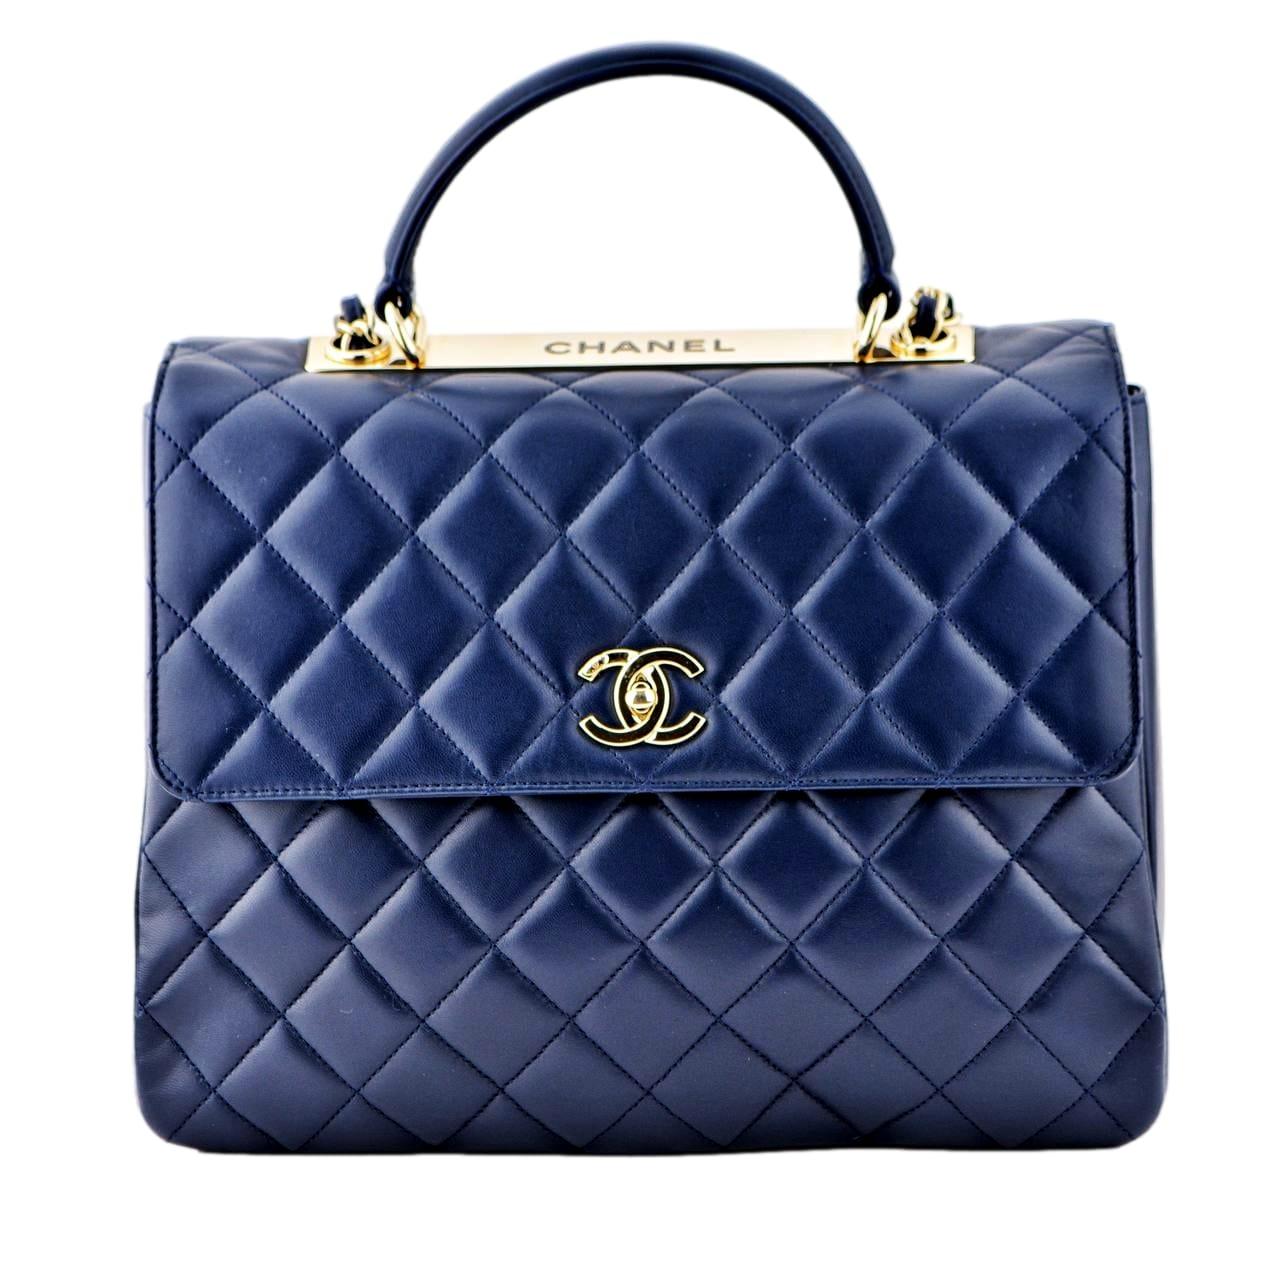 Chanel Large Trendy CC Top Handle Flap Bag in Navy Lambskin For Sale 3